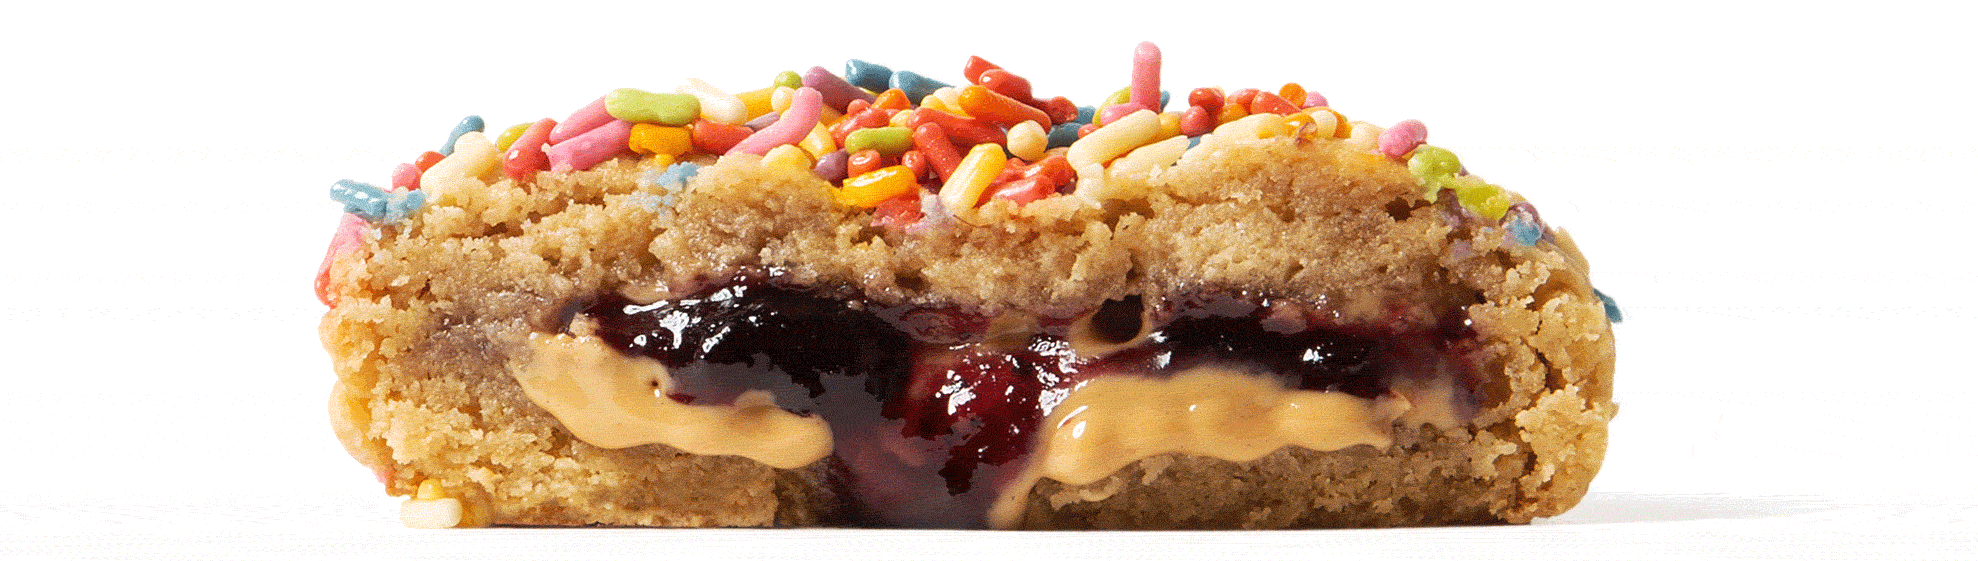 Cross section of the PB&J cookie showing the peanut butter and jelly filling oozing out